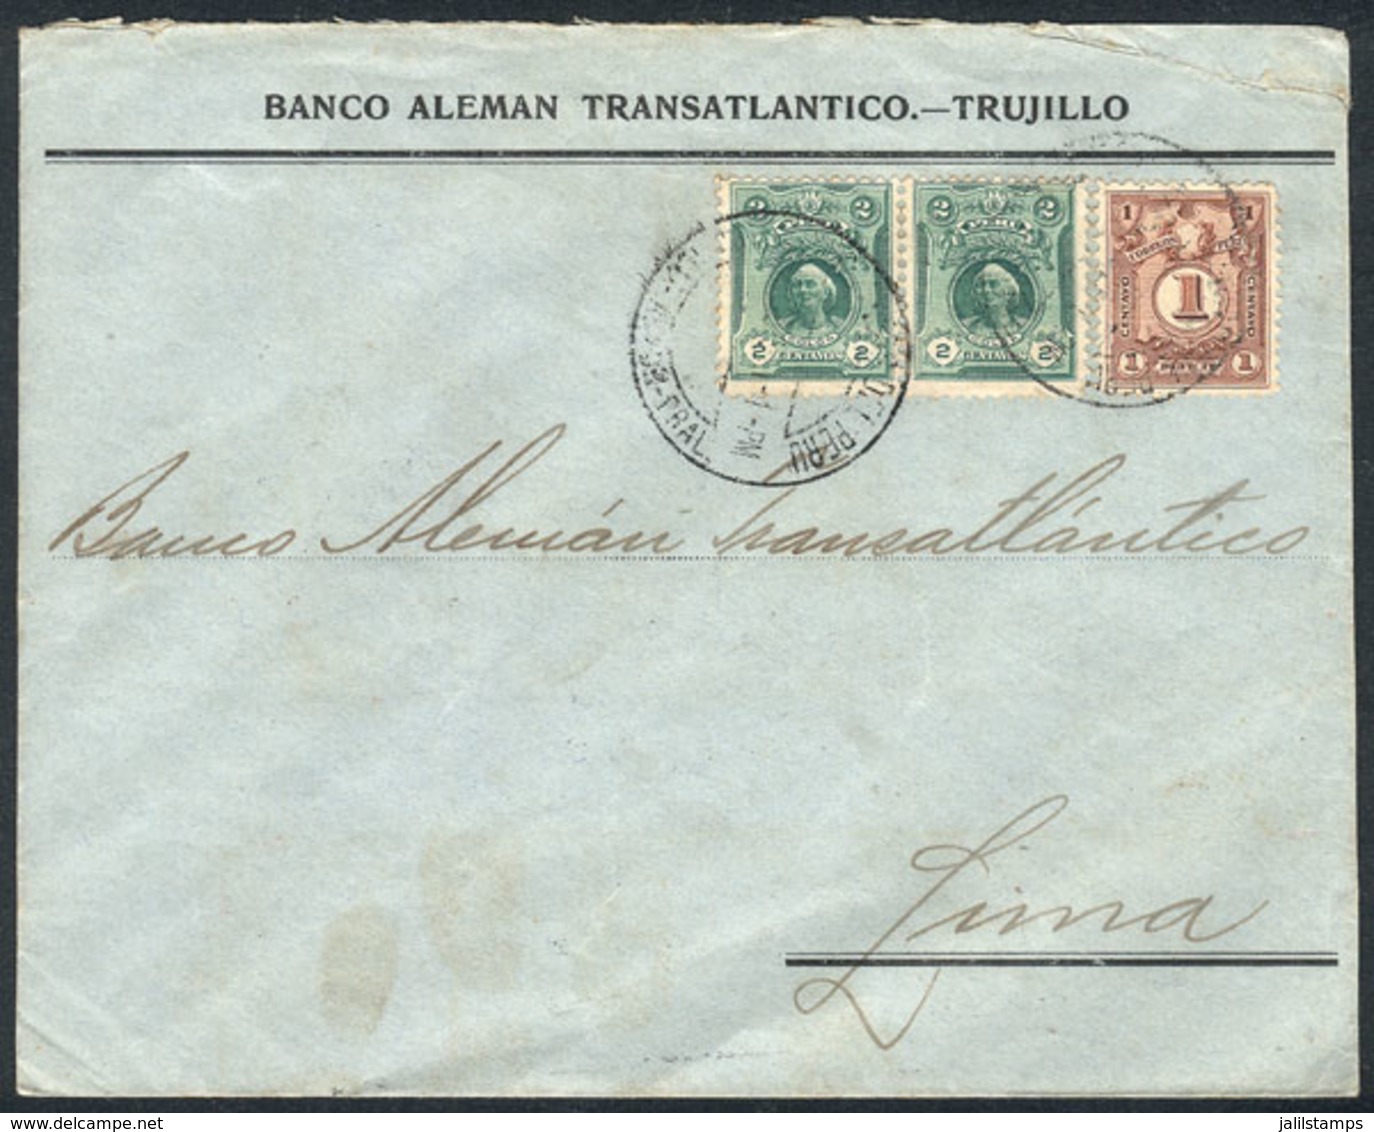 PERU: Cover Franked By Sc.178 Pair + Postage Dues Stamp Sc.J40, Total 5c., Used In Lima, Fine Quality! - Peru